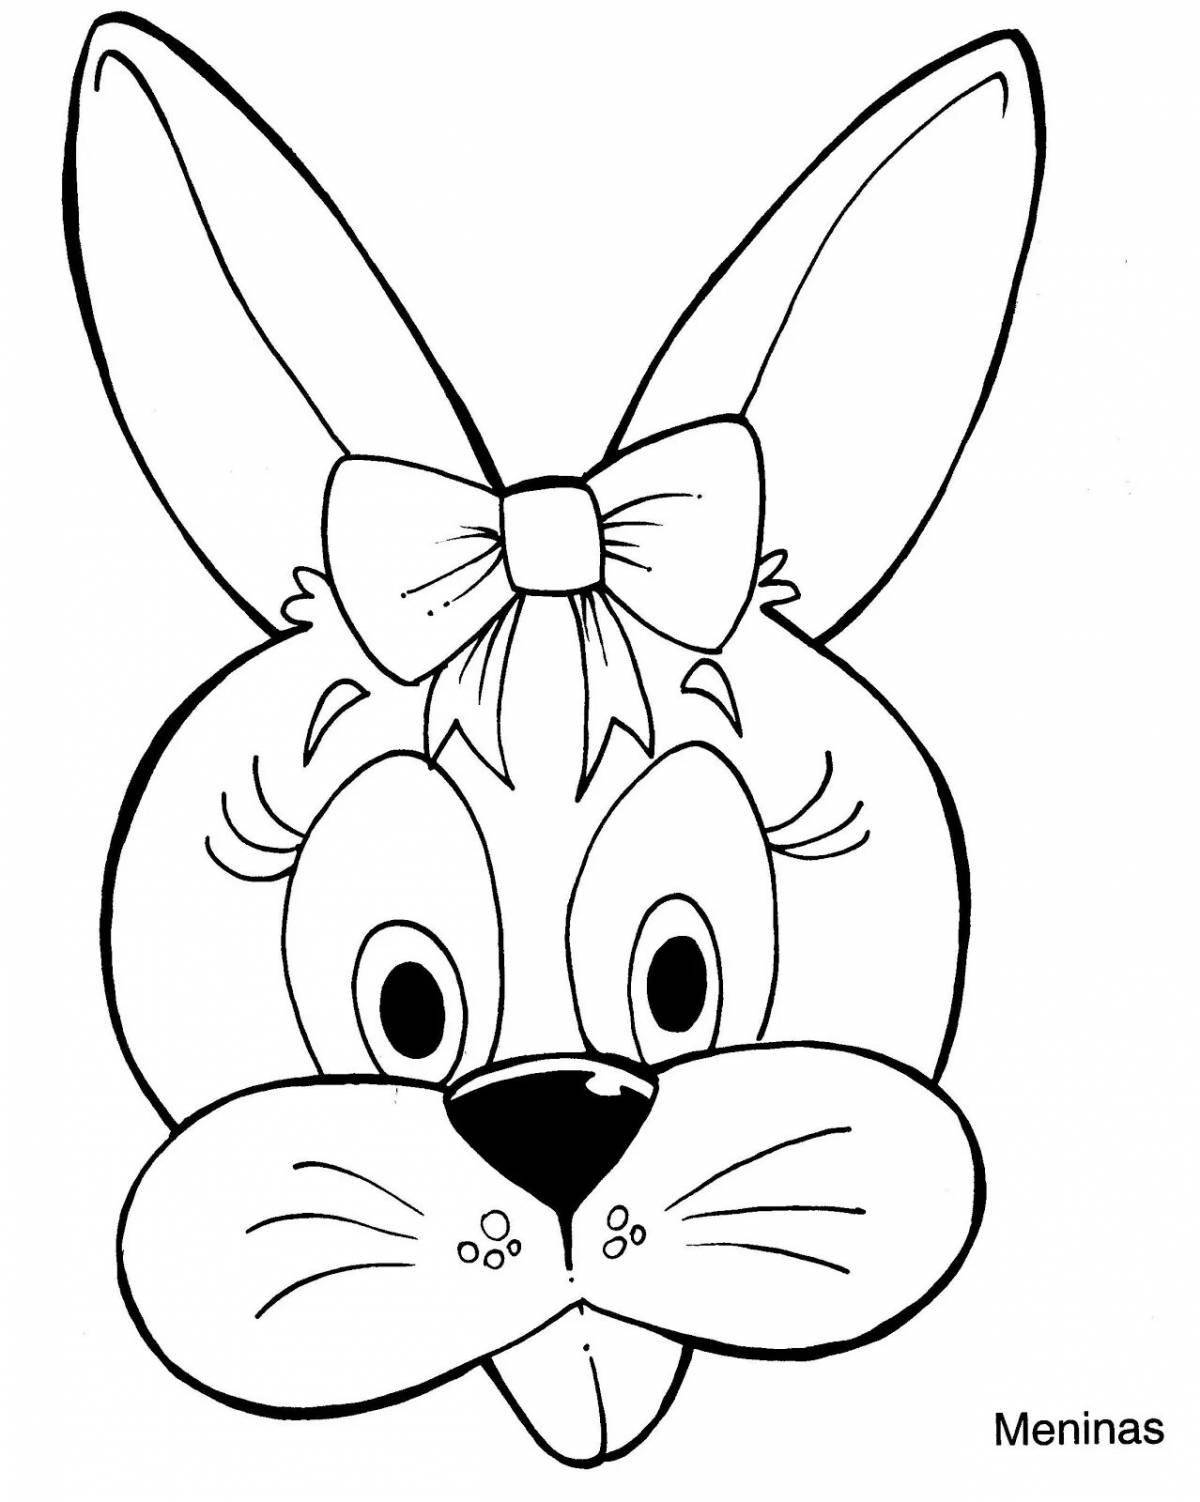 Majestic hare mask coloring page